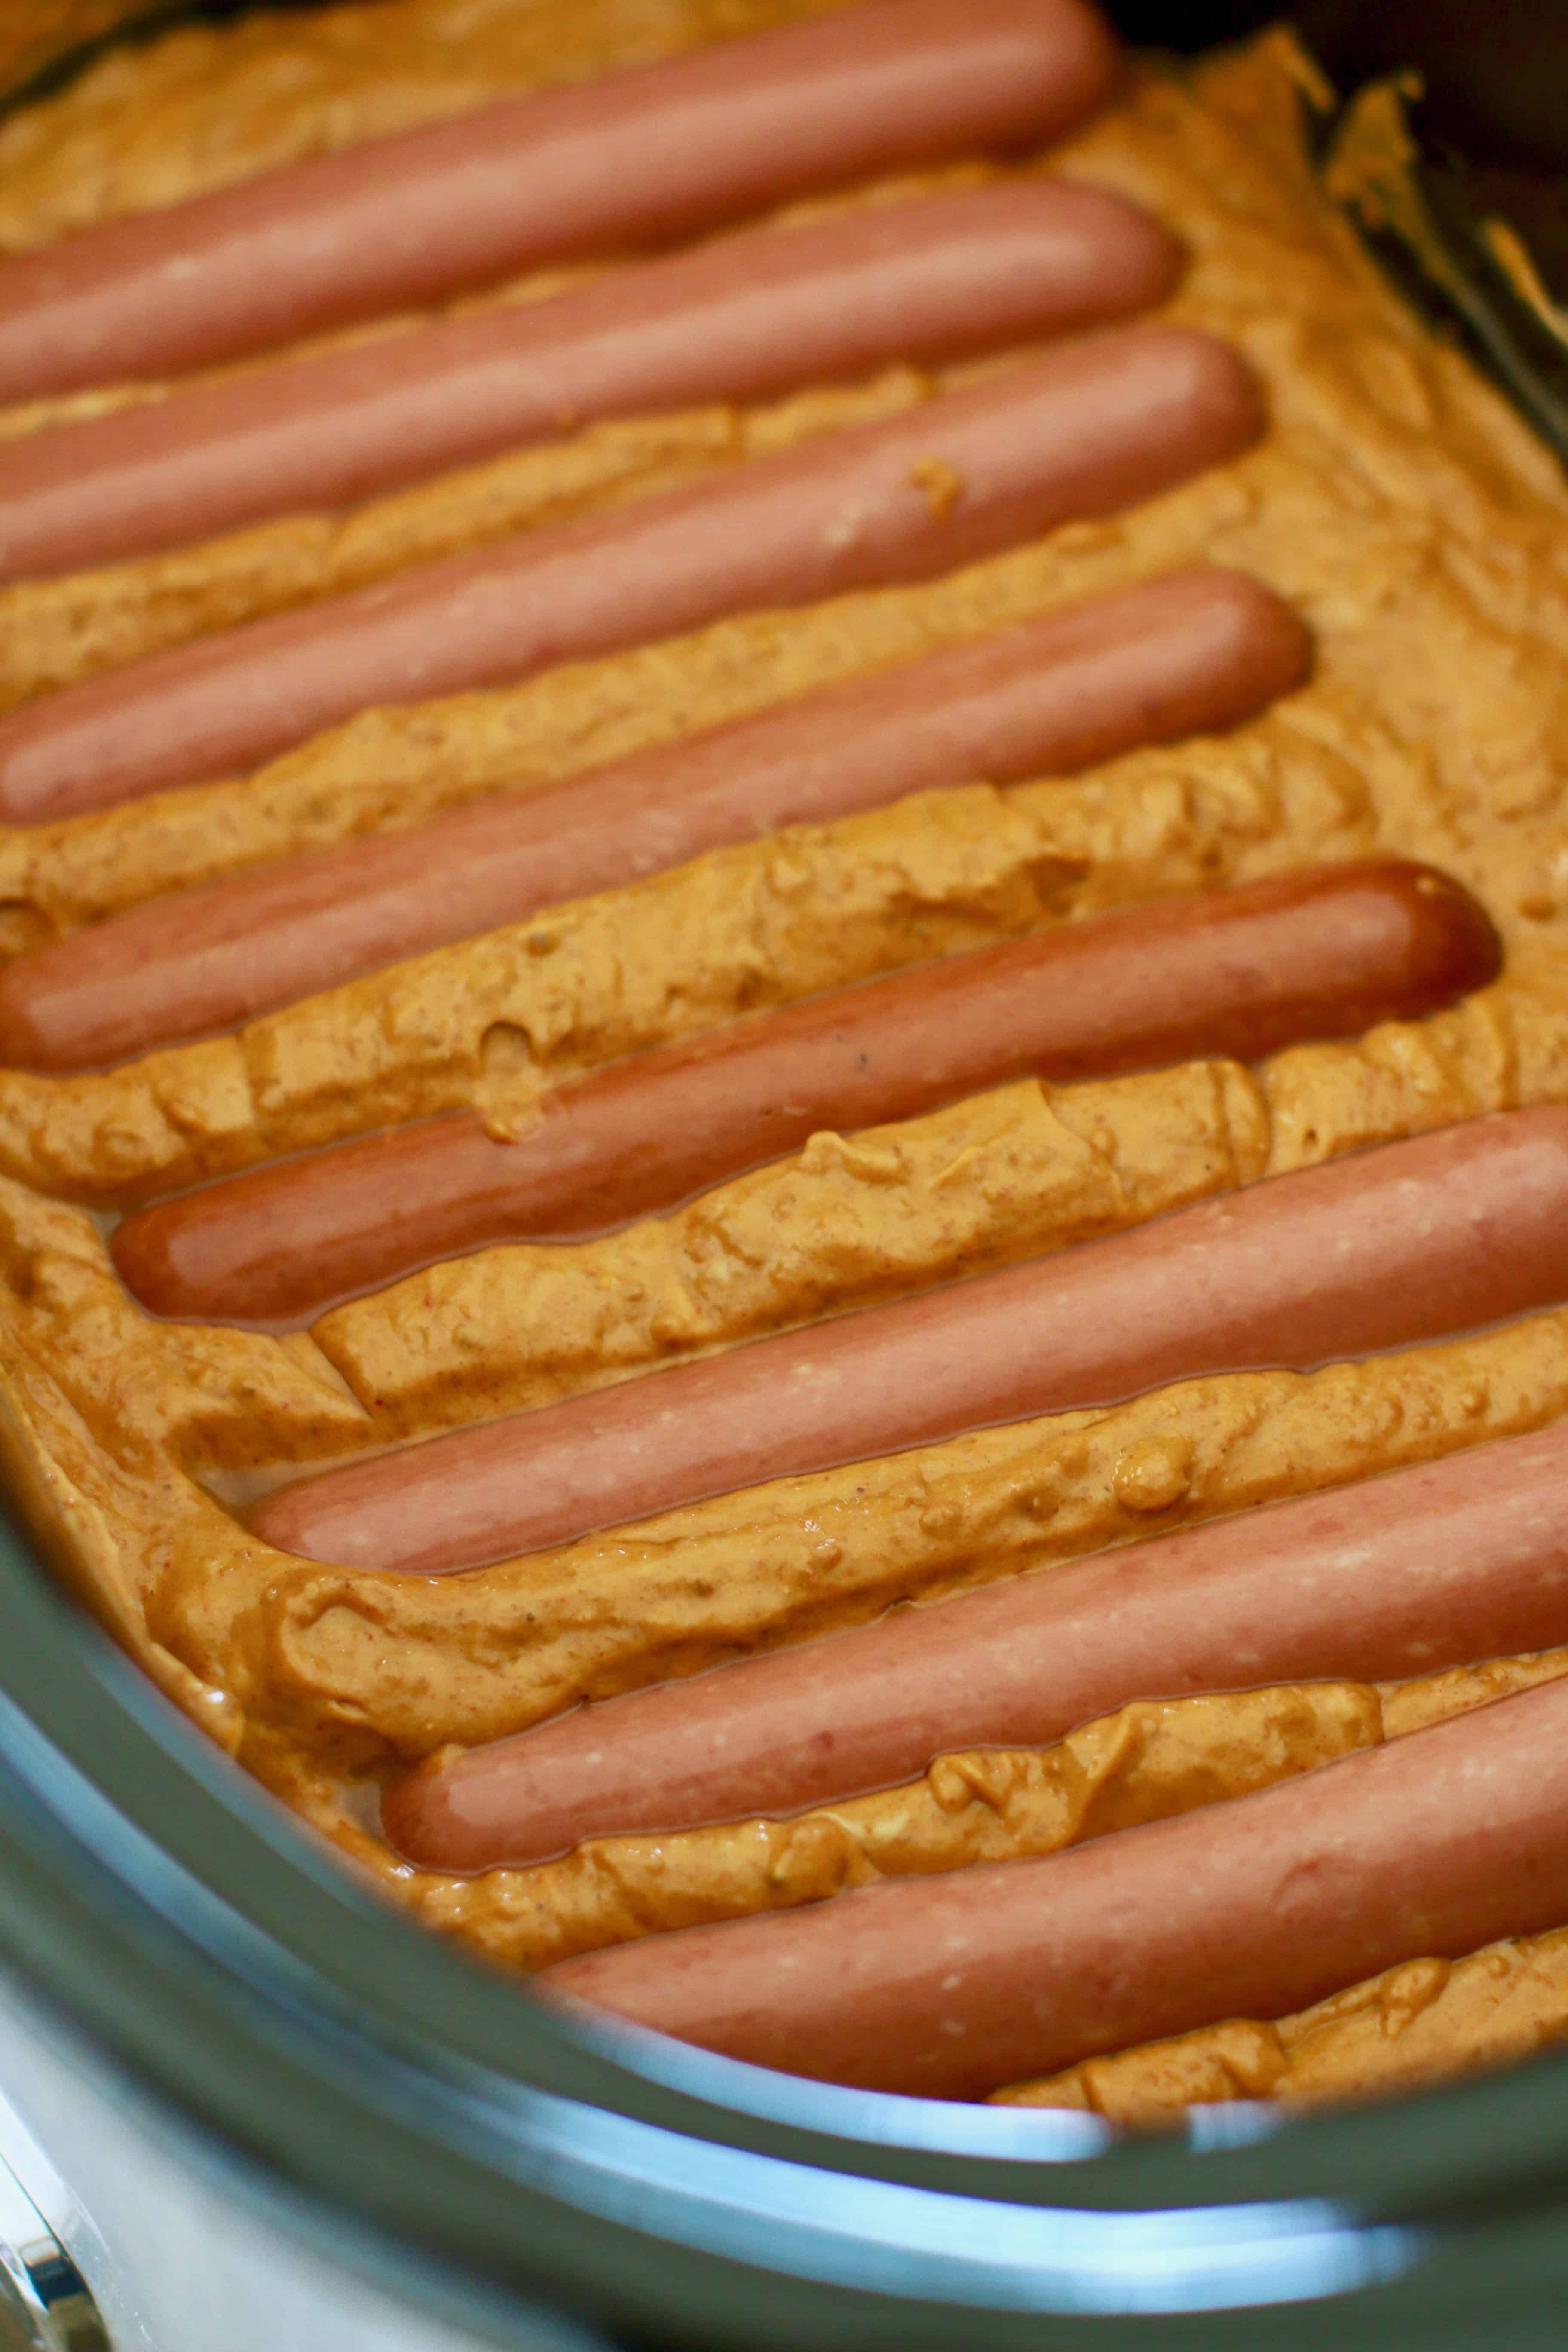 hot dogs in a row, laying on top of chili and cheese sauce.